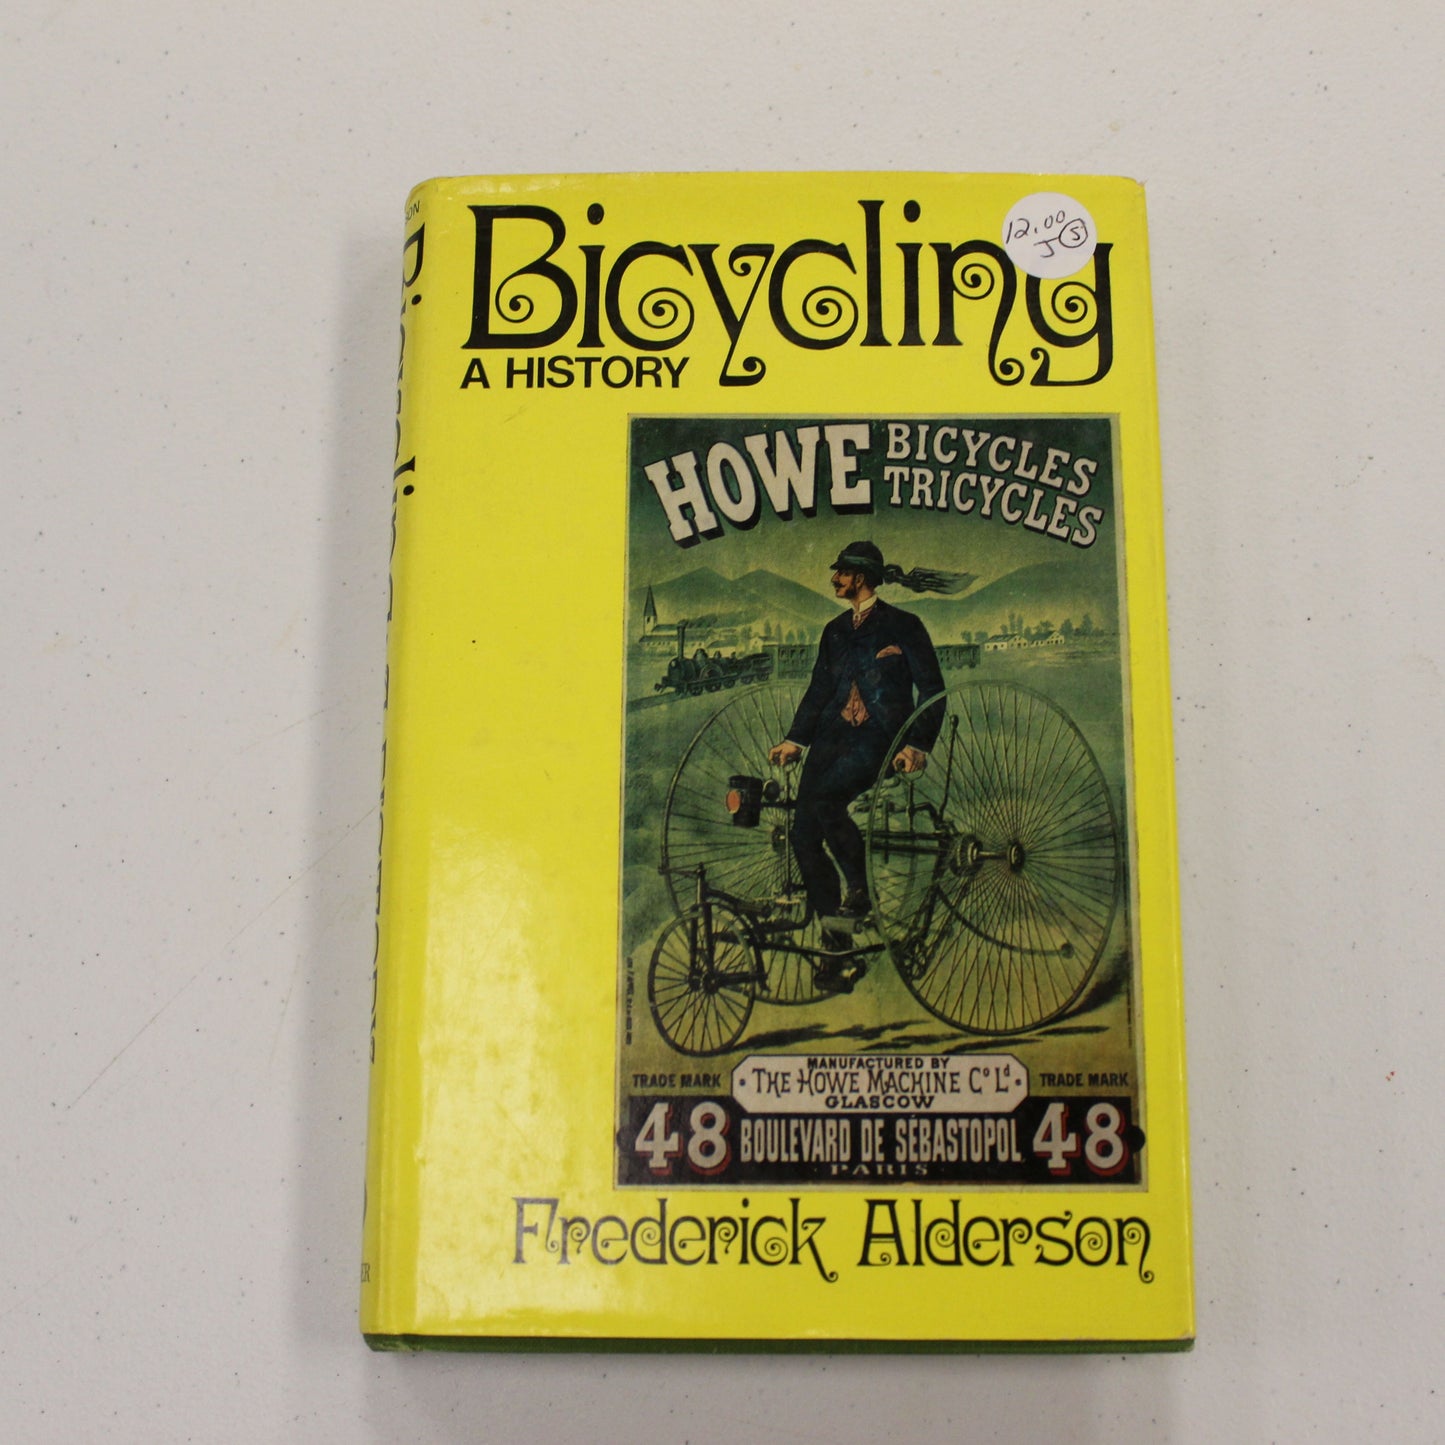 BICYCLING: A HISTORY